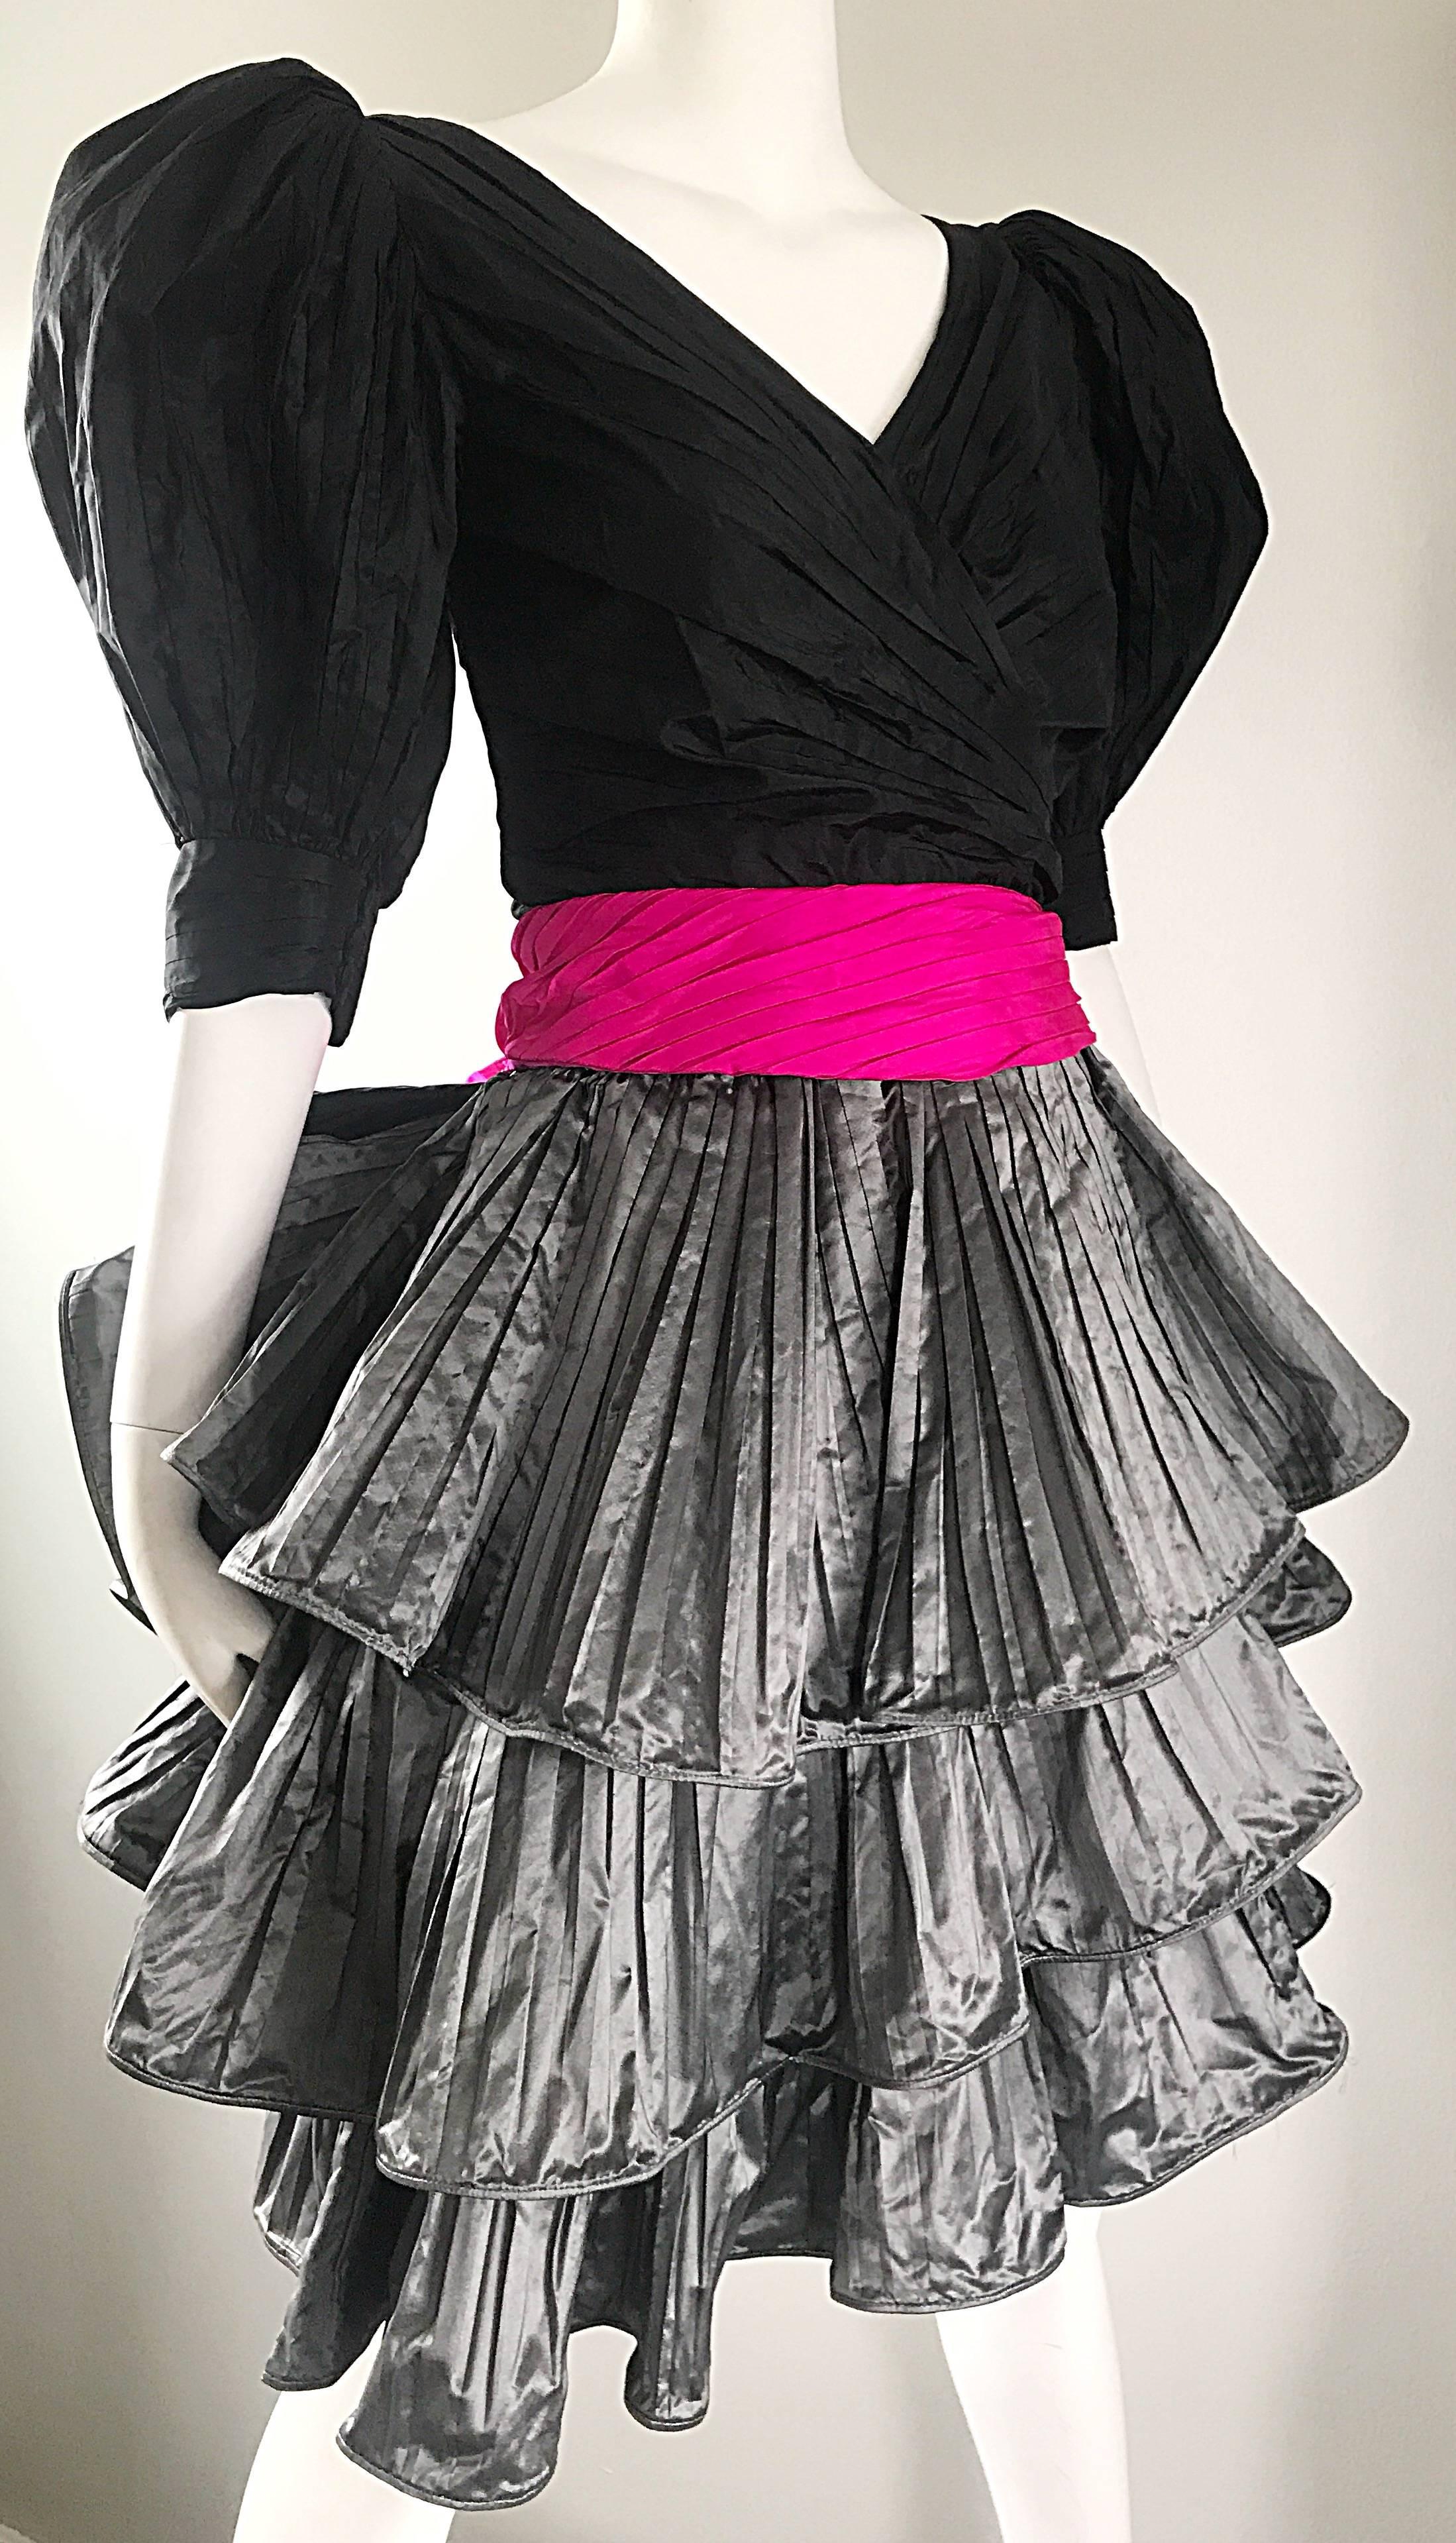 I980s Vintage Paul Louis Orrier Couture Avant Garde Taffeta 80s Cocktail Dress In Excellent Condition For Sale In San Diego, CA